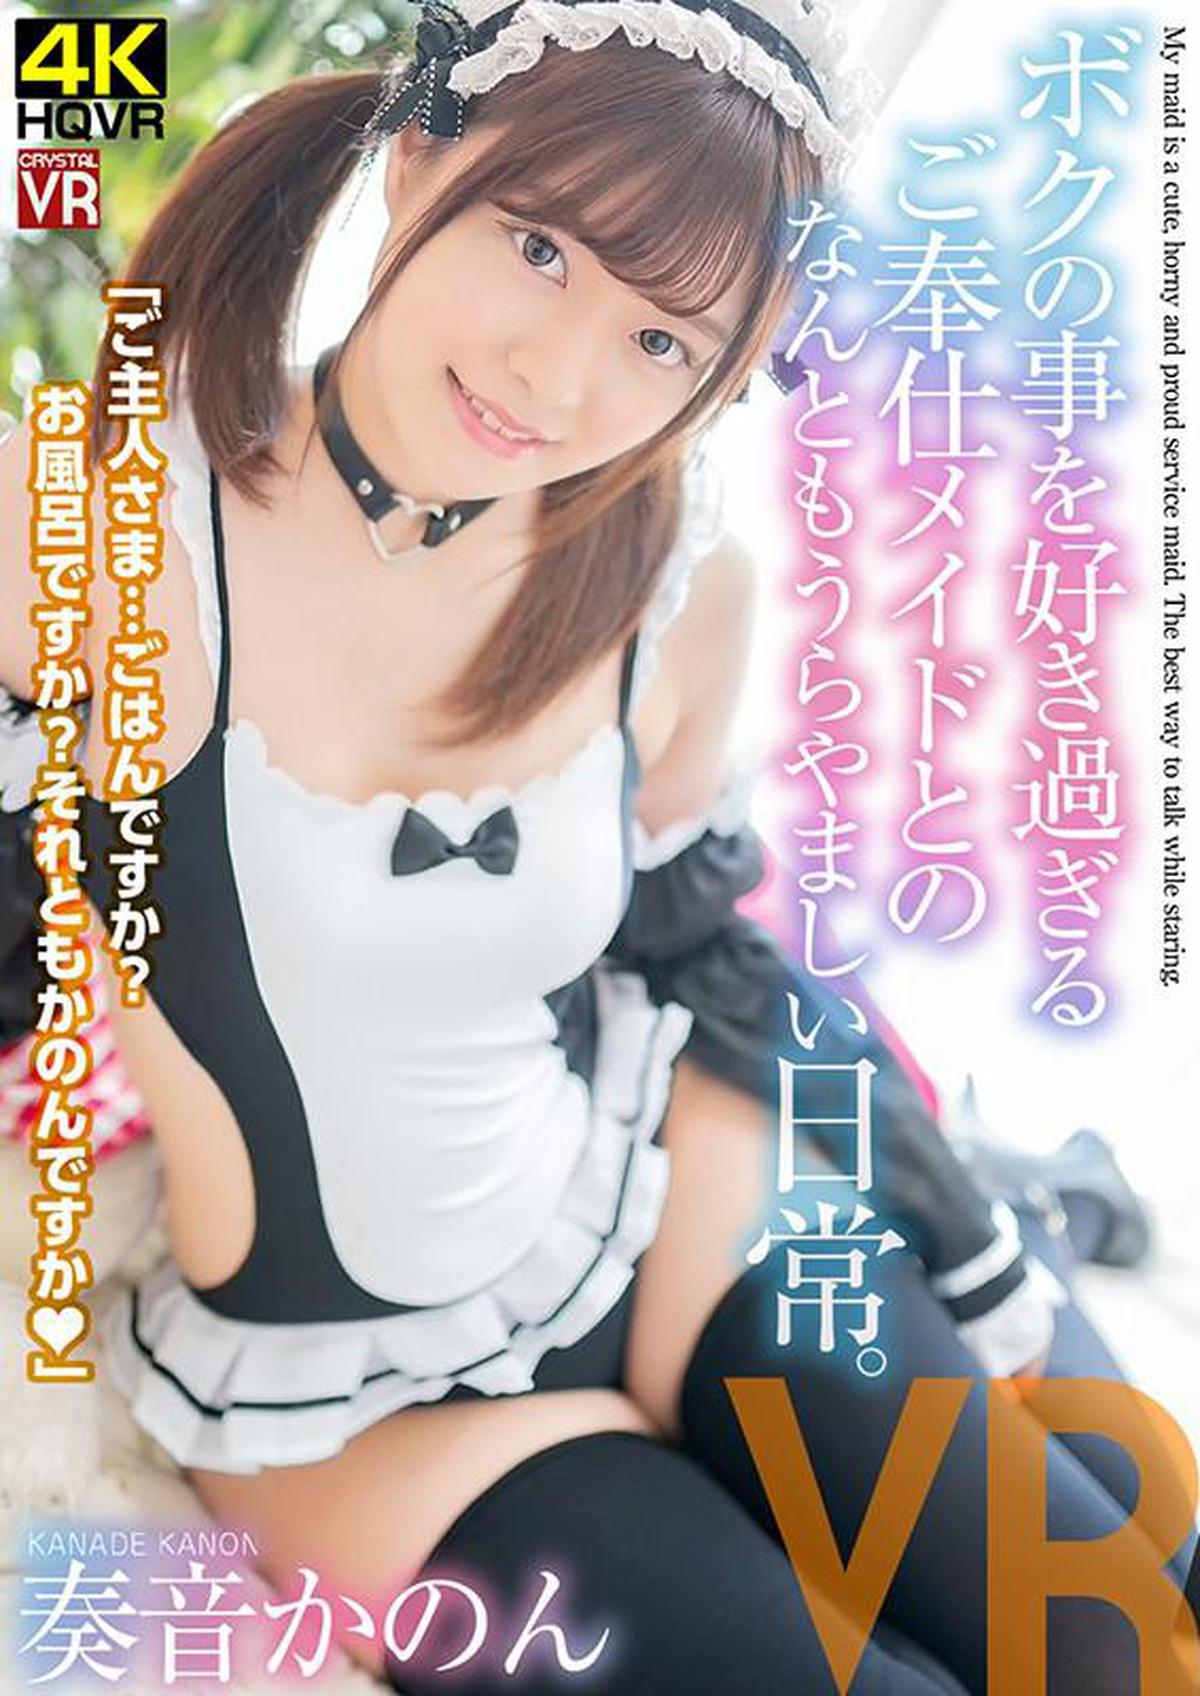 (VR) (4K) CRVR-163 [4K Takumi] Kanon Kanade Smile is too nice! What an enviable daily life with a service maid who likes me too much.